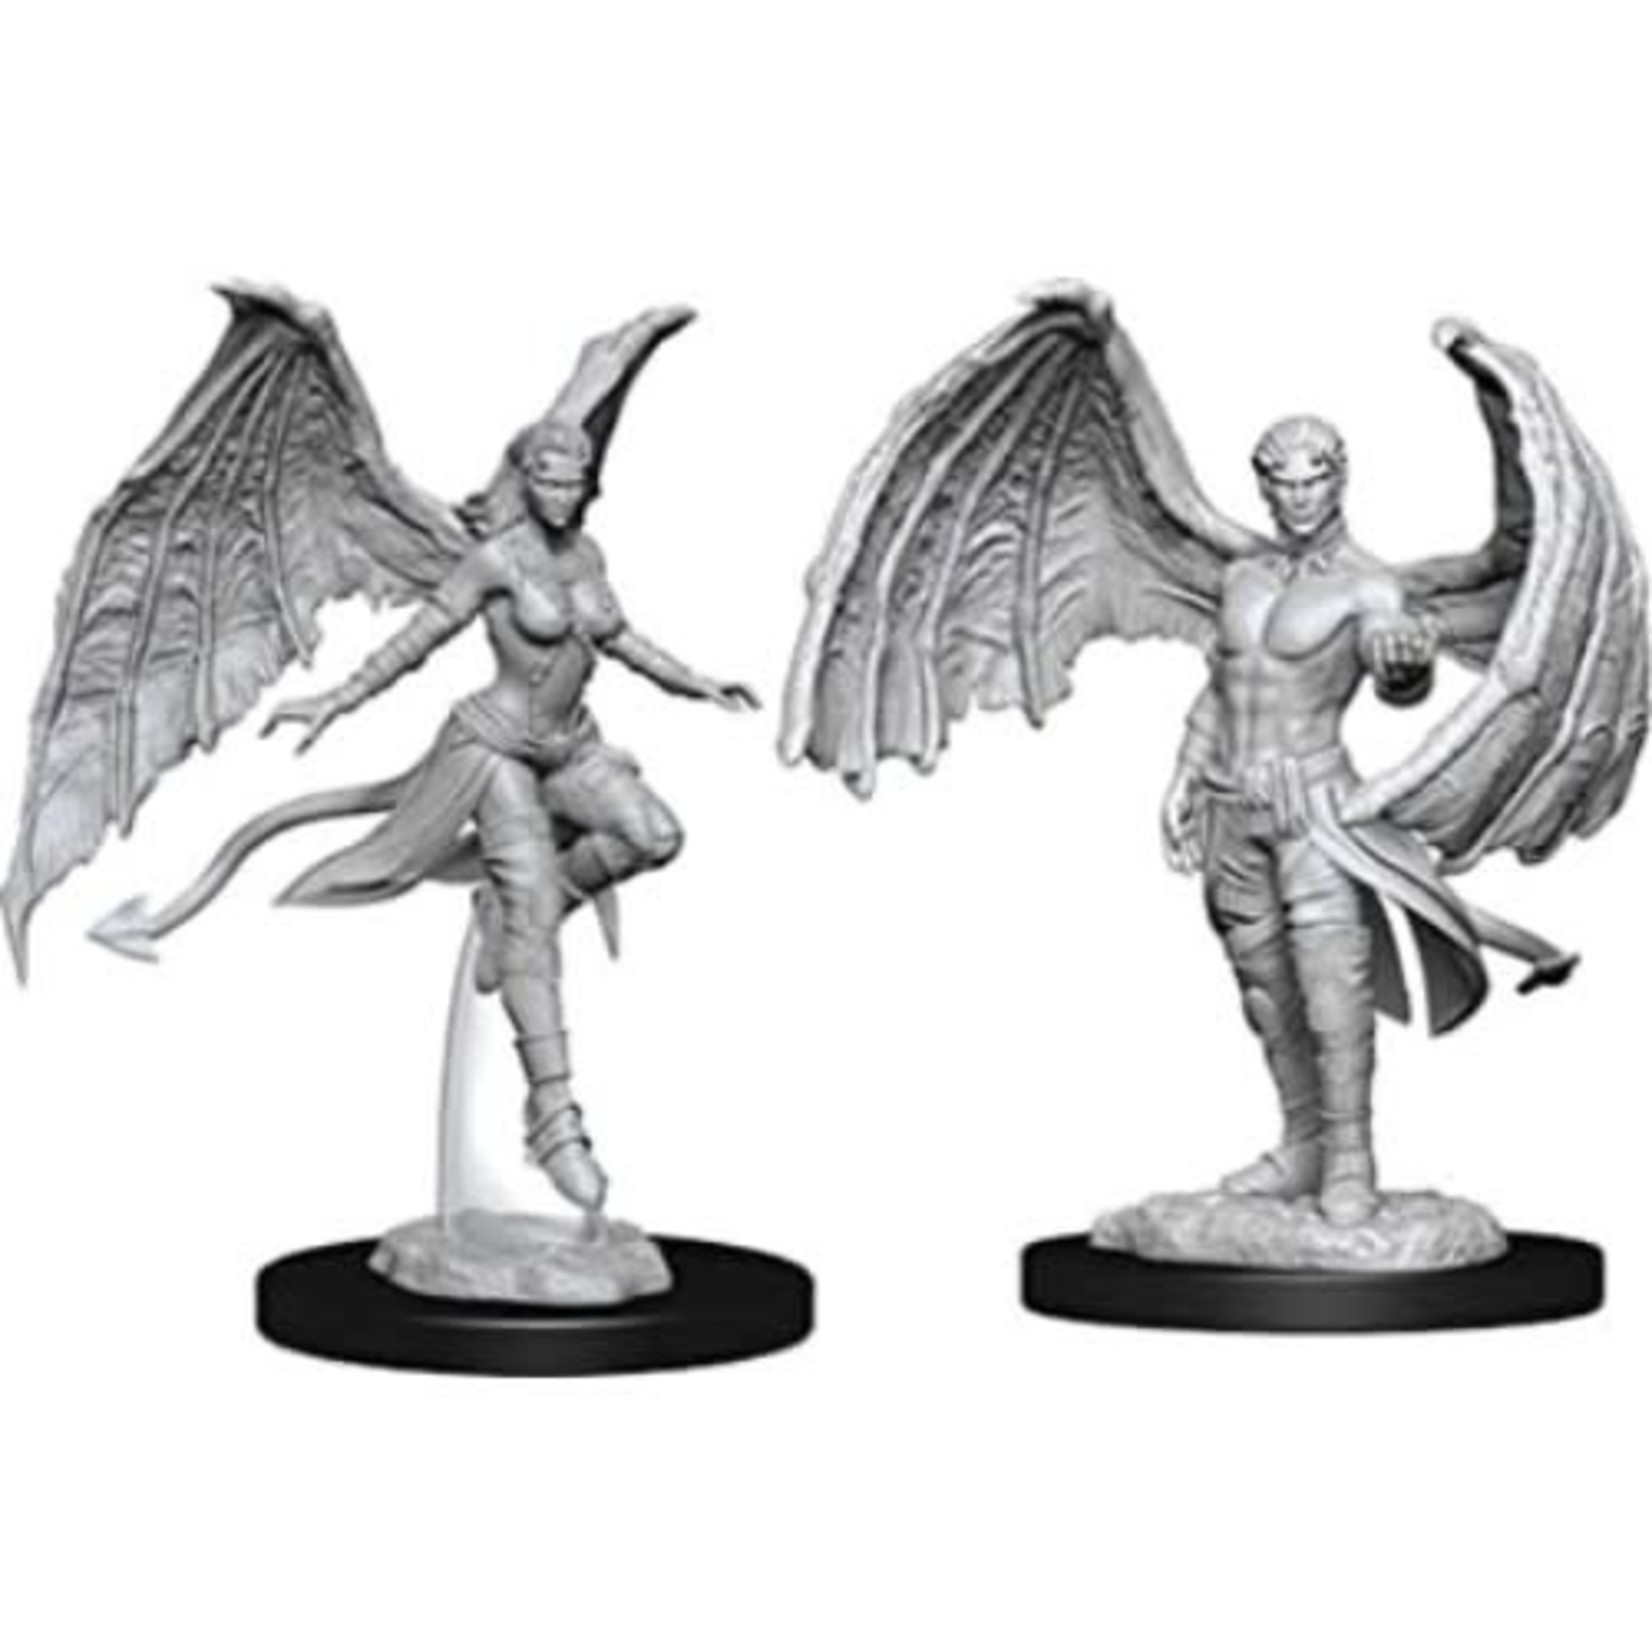 WizKids Dungeons and Dragons Nolzur's Marvelous Minis Succubus and Incubus